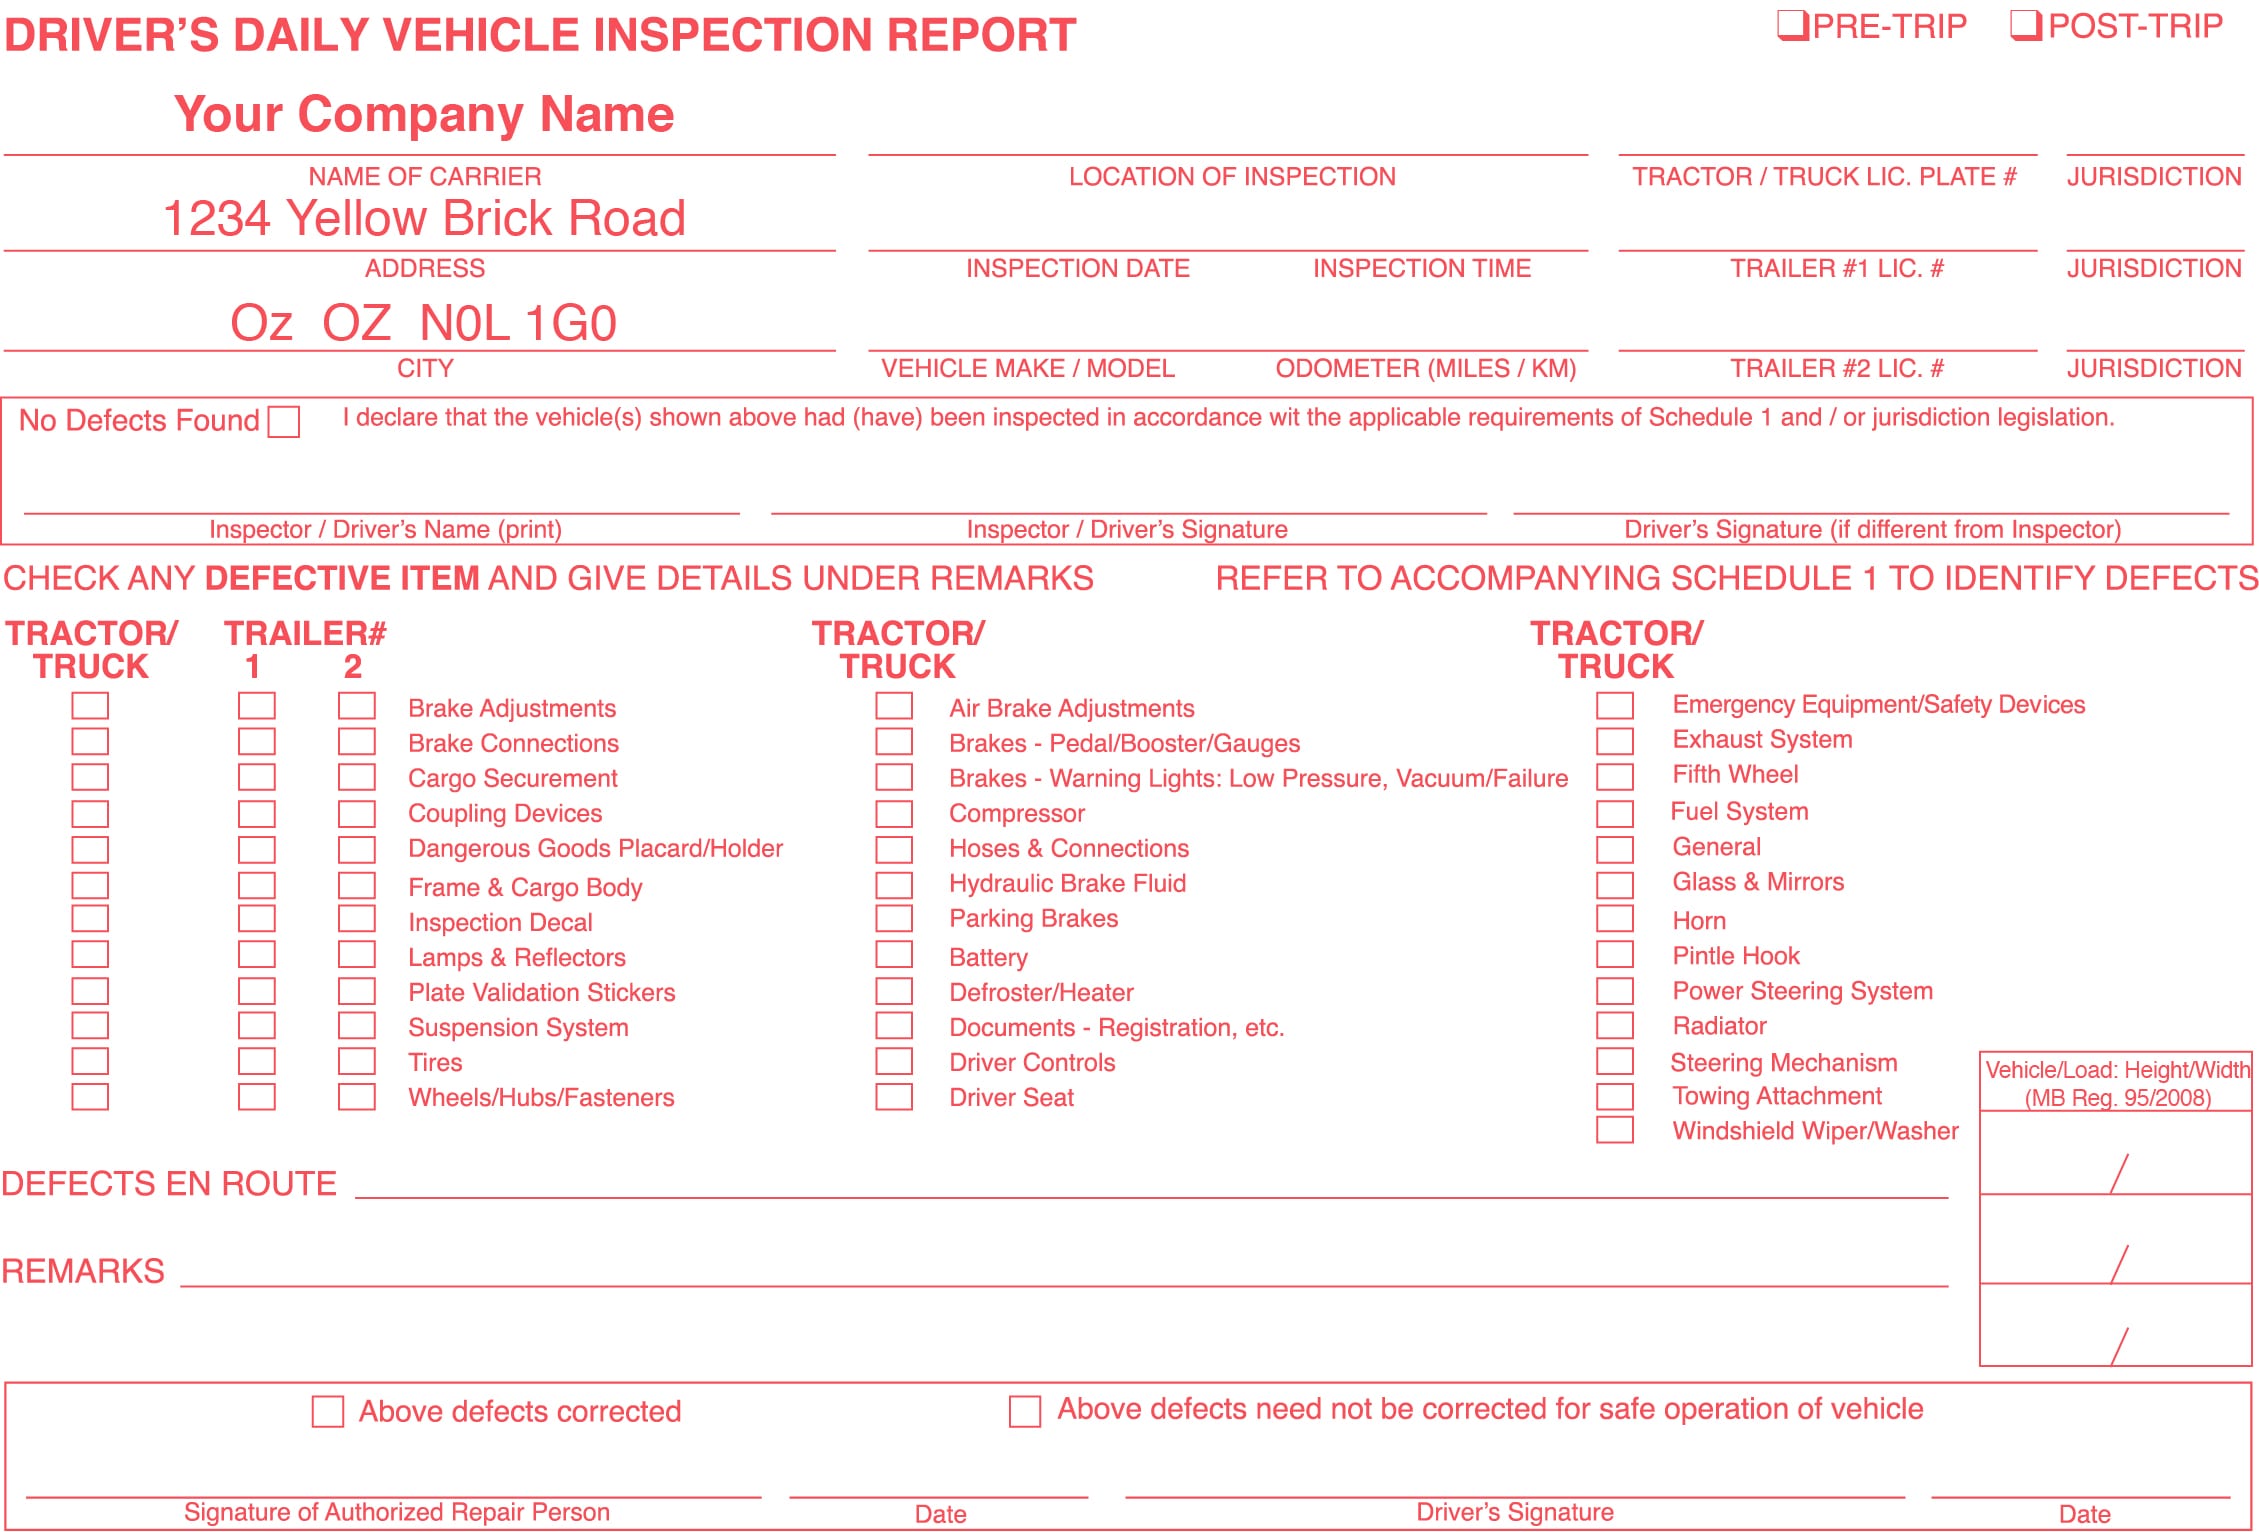 vehicle-inspection-report-helps-keep-your-drivers-safe-and-on-the-road